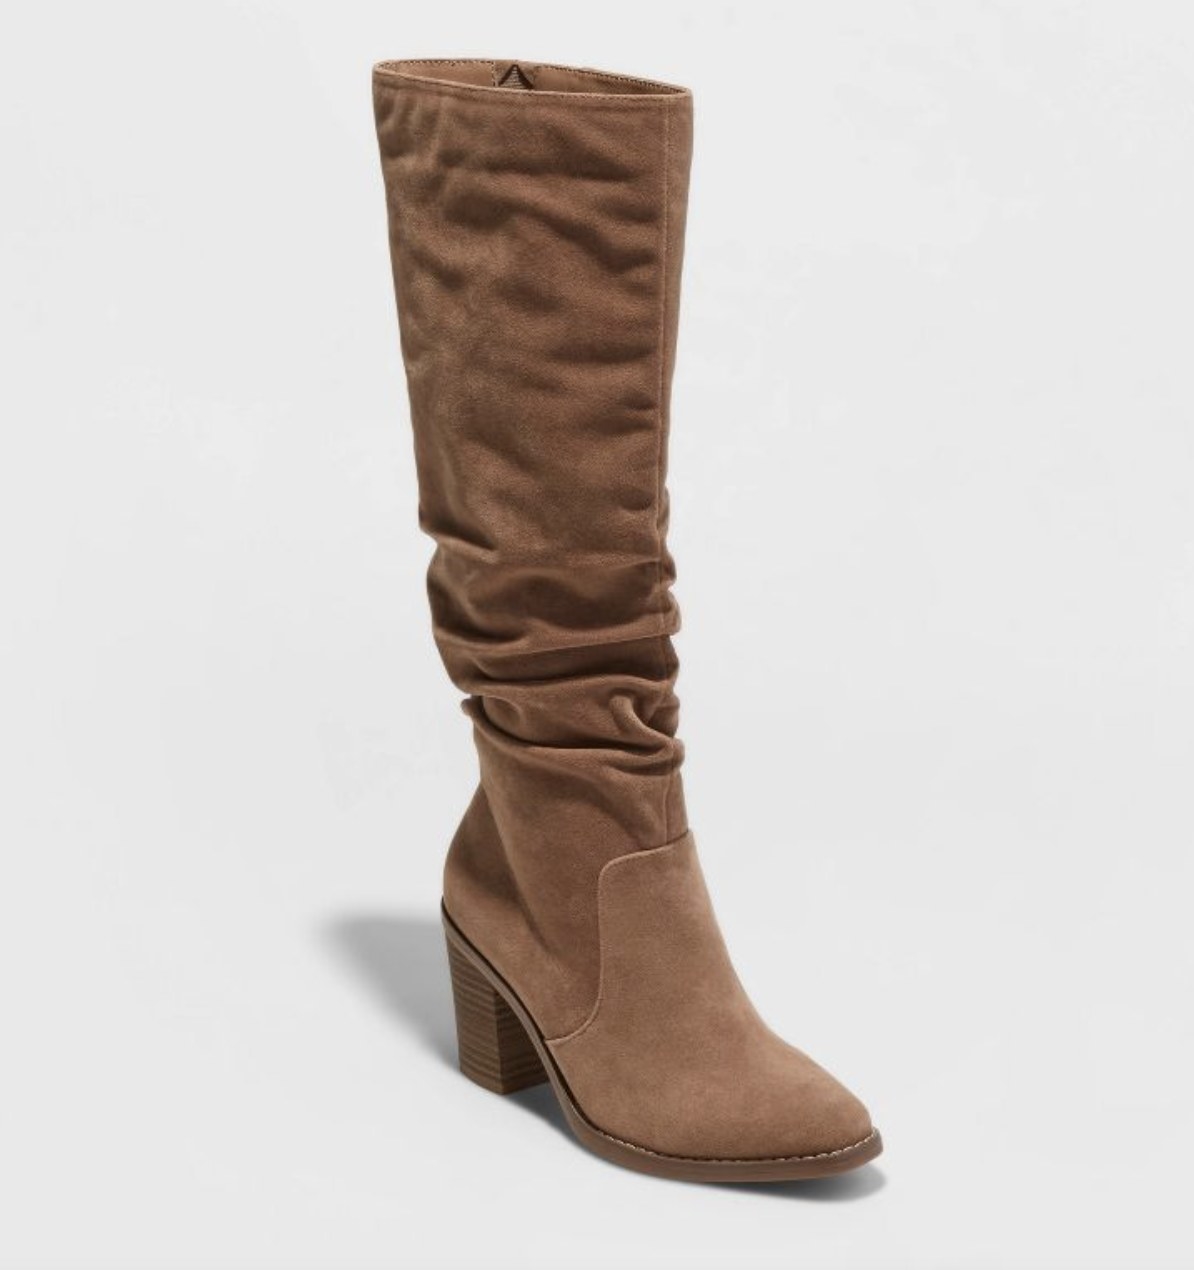 A tall ruched brown boot